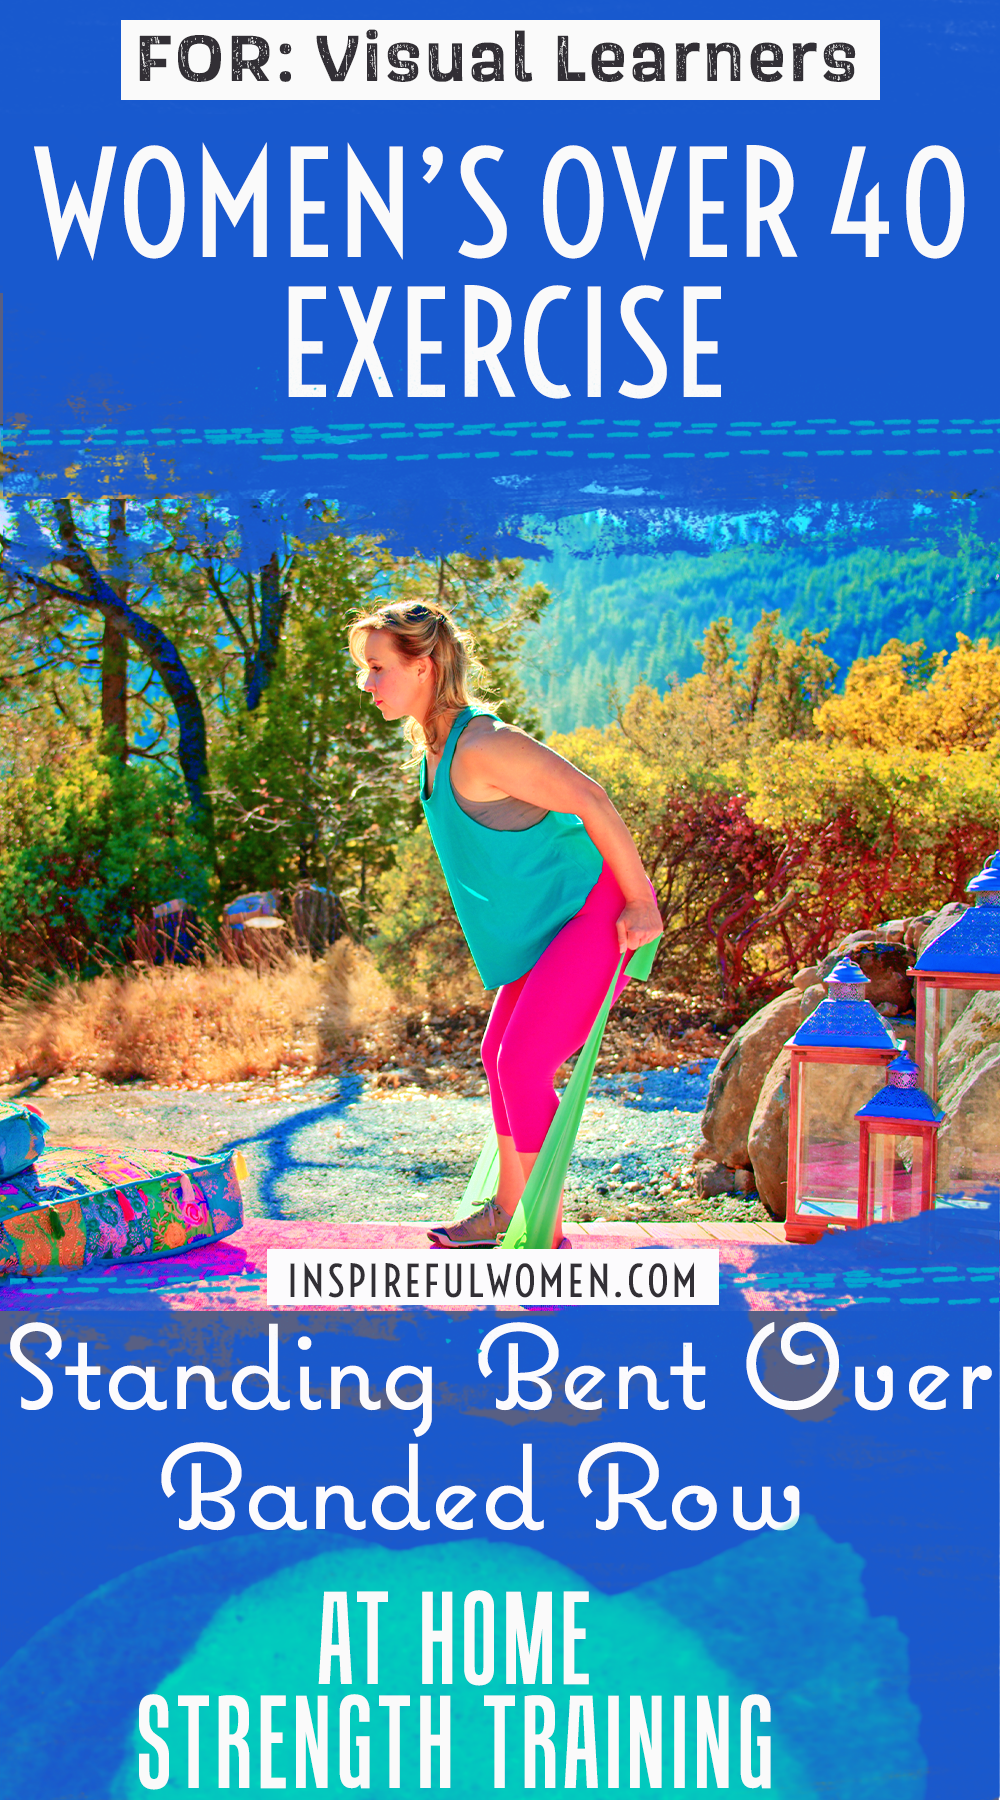 2-arm-banded-row-standing-bent-over-back-strength-exercise-at-home-women-over-40